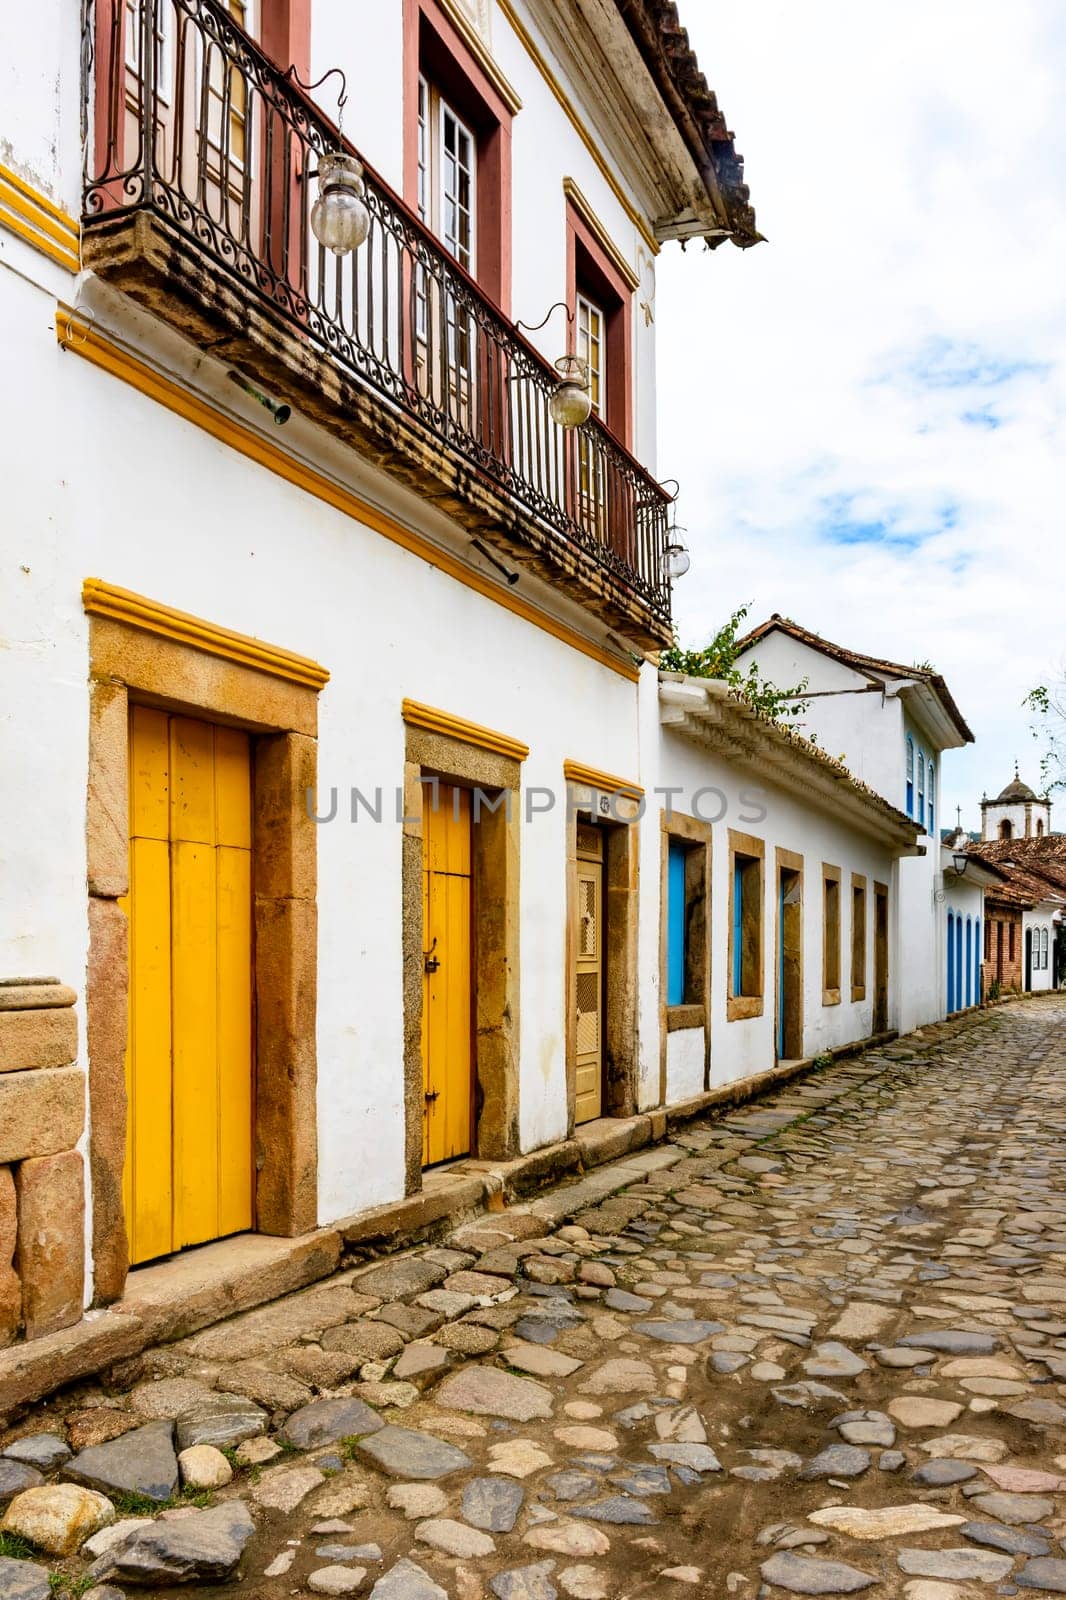 City of Paraty in the state of Rio de Janeiro by Fred_Pinheiro